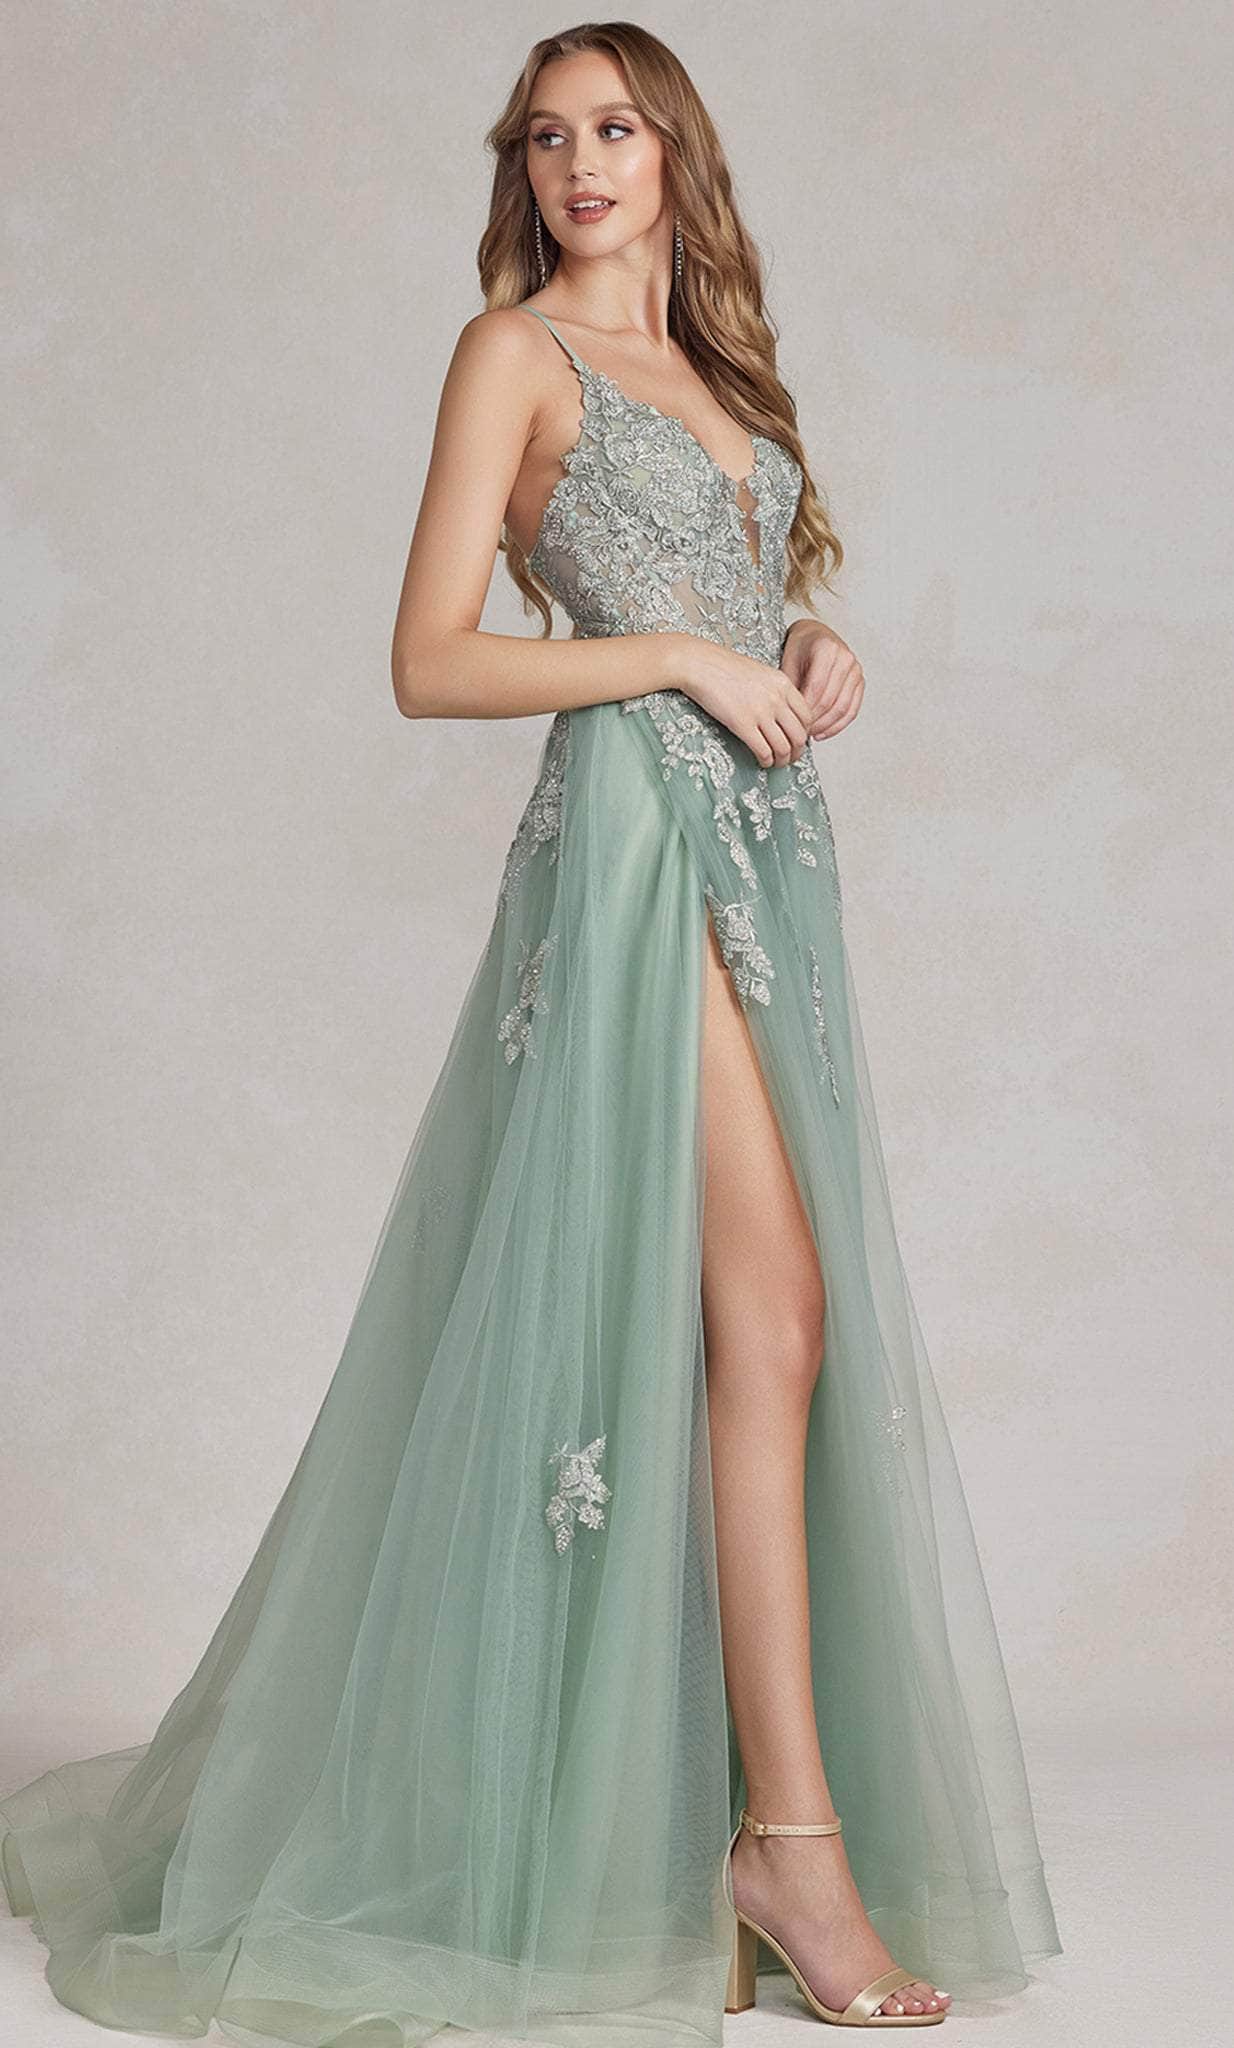 Nox Anabel G1149 - Embroidered Plunging V-Neck Prom Gown
